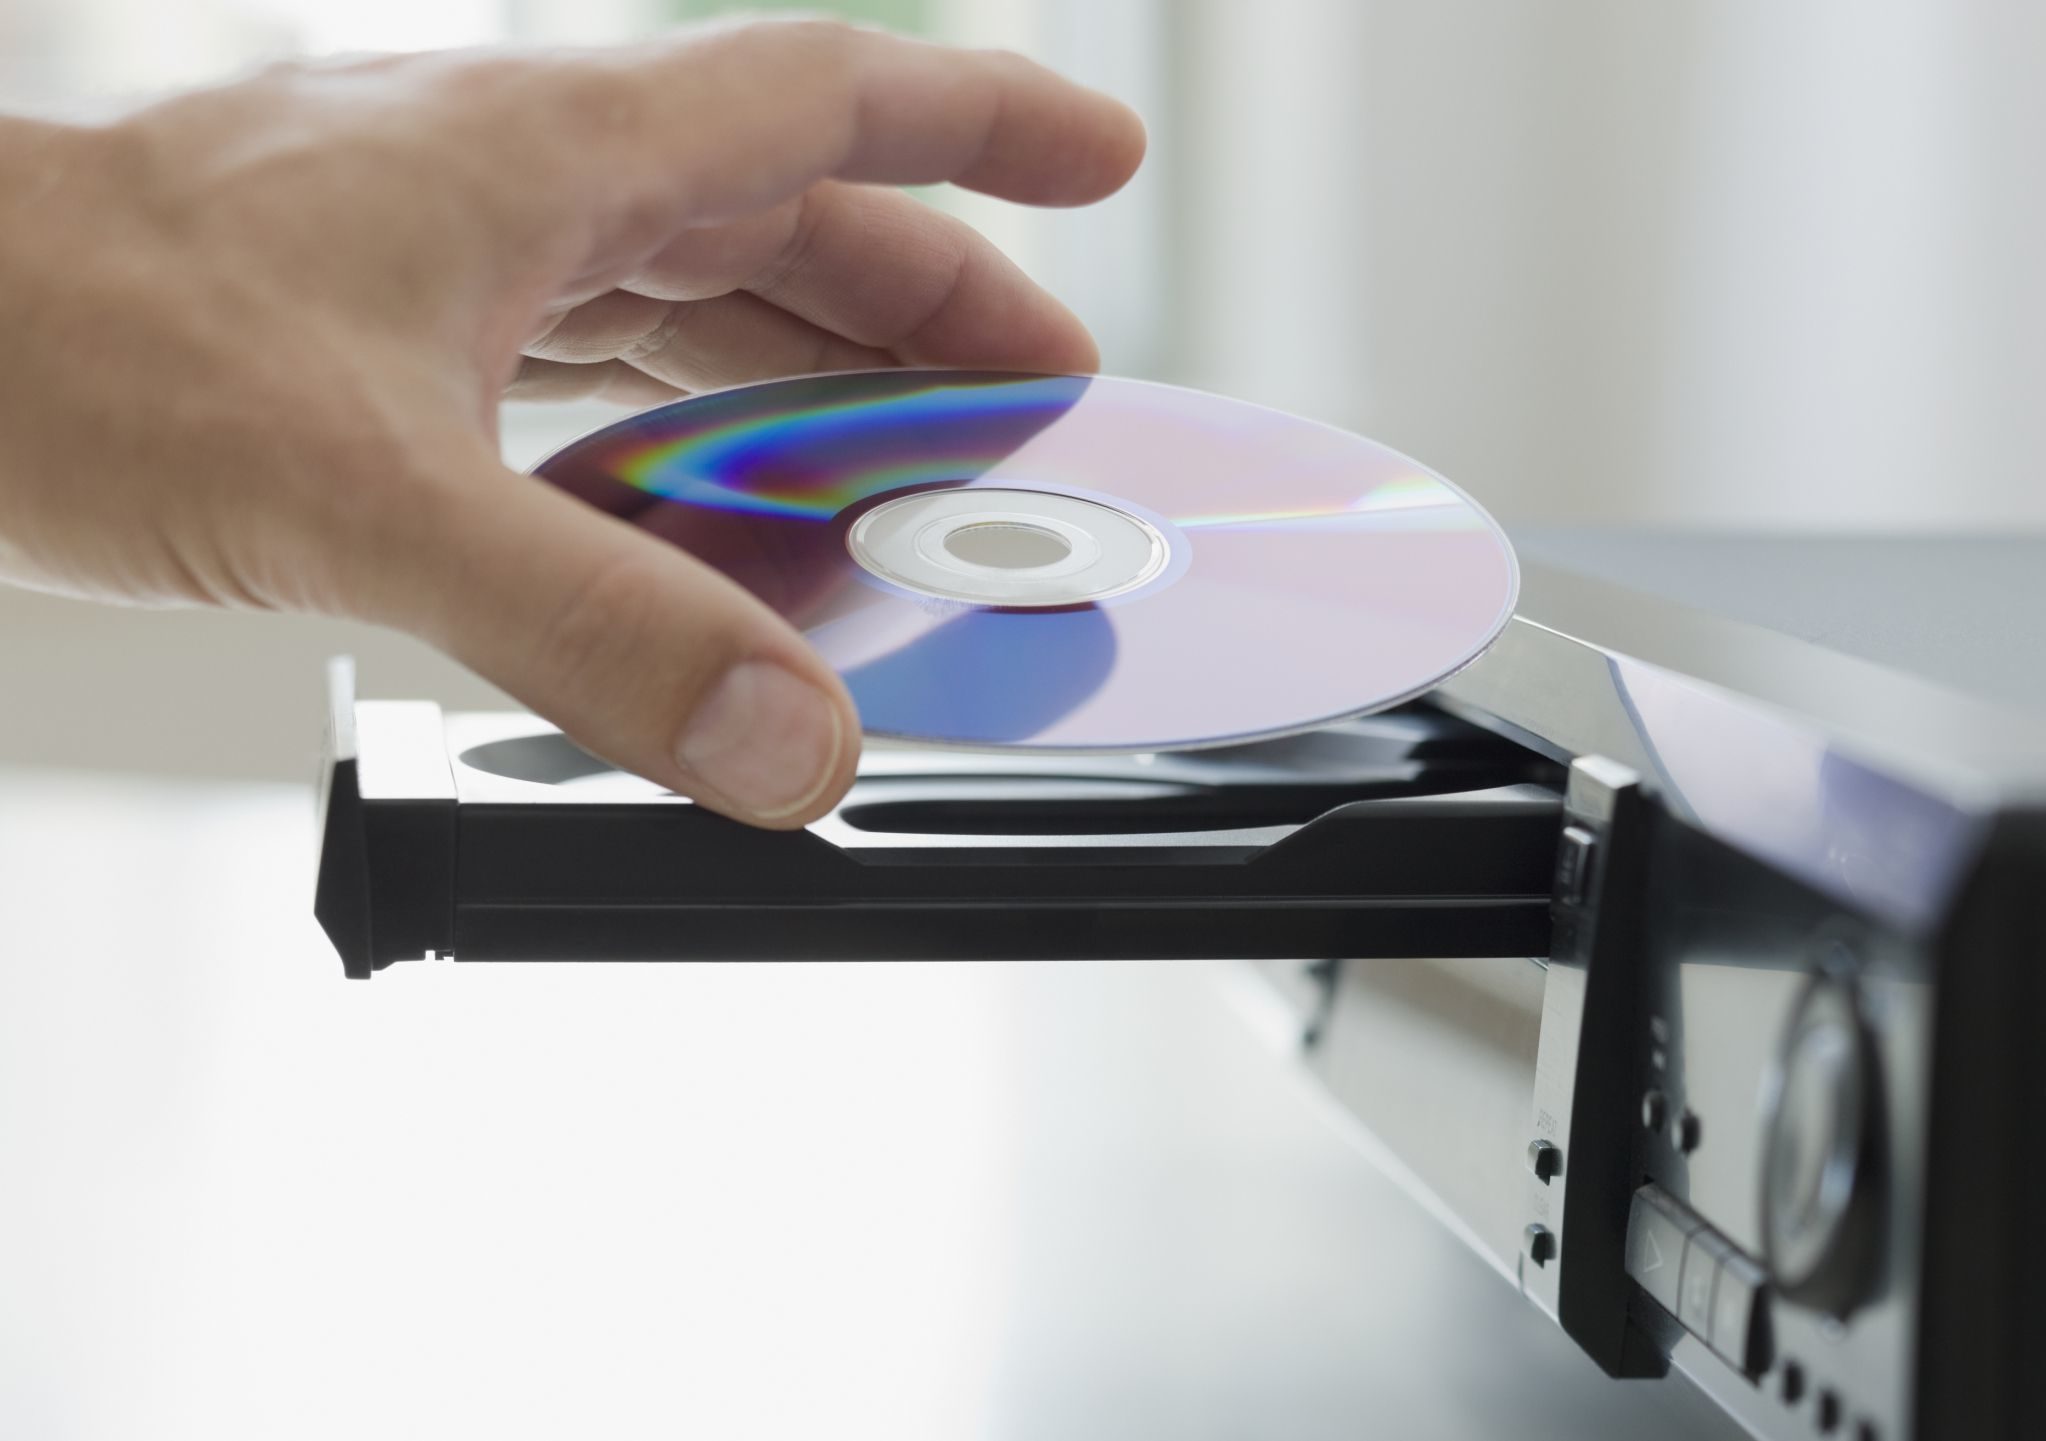 Business man placing cd in machine cd tray. Judicial Research Duplication & Replication Services are quick, easy, and affordable for CD, DVD, Blu-Ray, Video, Tape. Trusted for over 23 years, best in duplication services